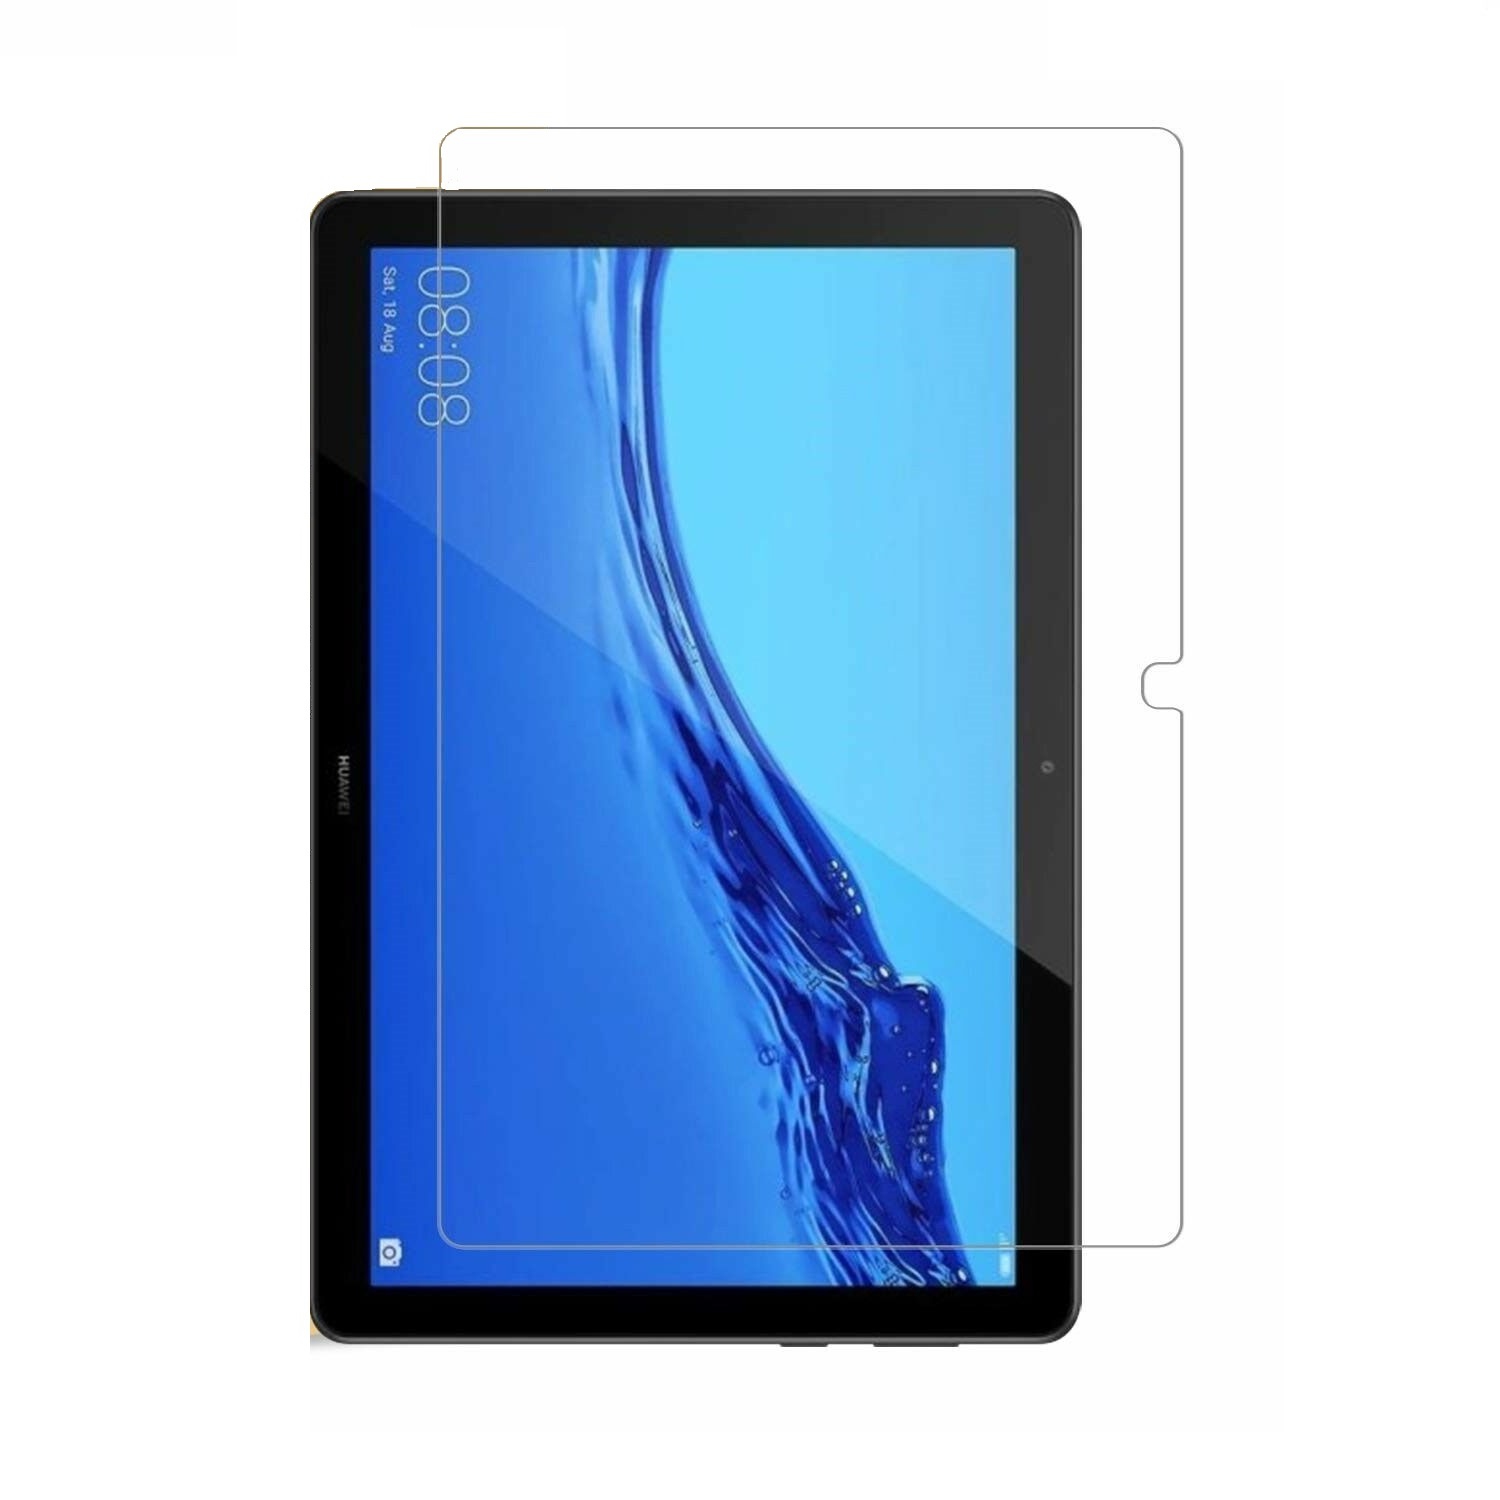 TopSave [1Piece] Tempered Glass Screen Protector for Huawei MediaPad T3